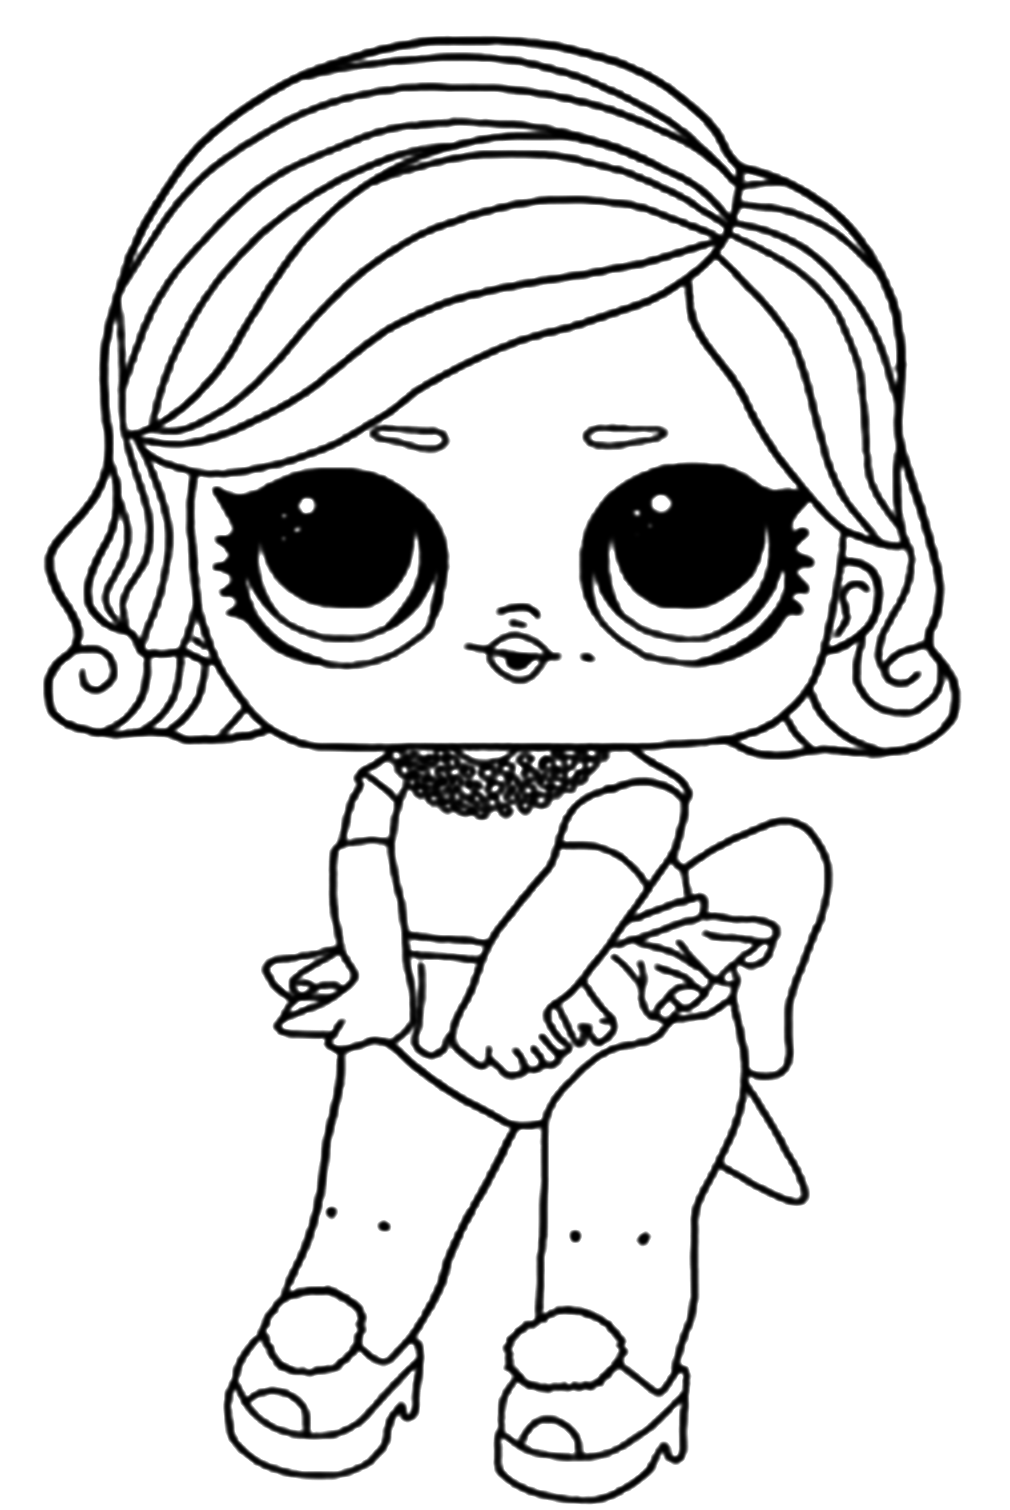 Glamour Quene Coloring Page